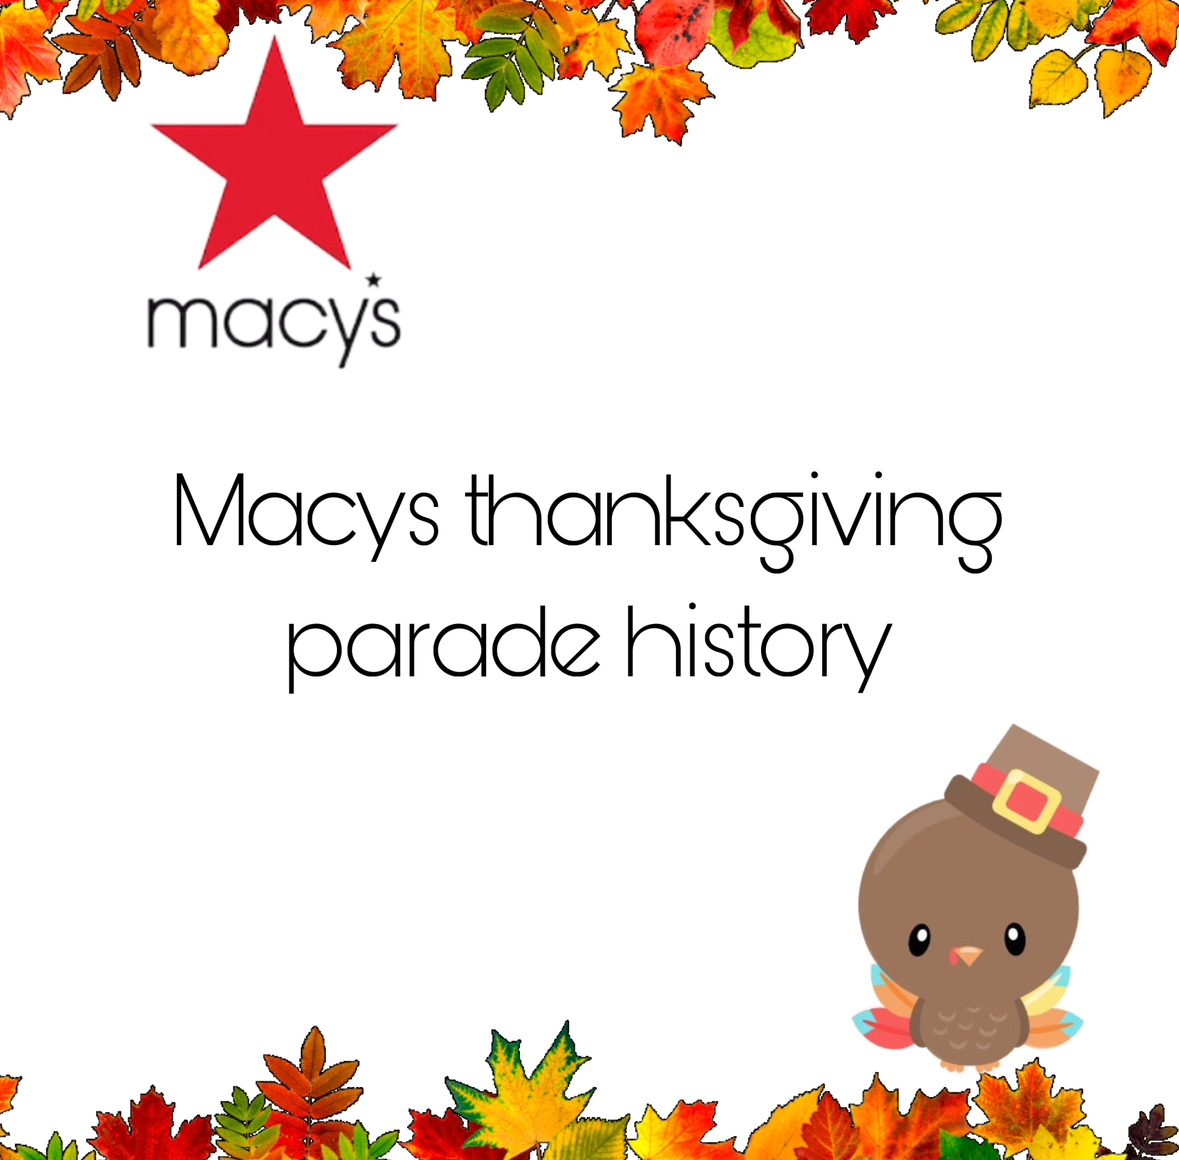 History of the Macy Thanksgiving Parade.